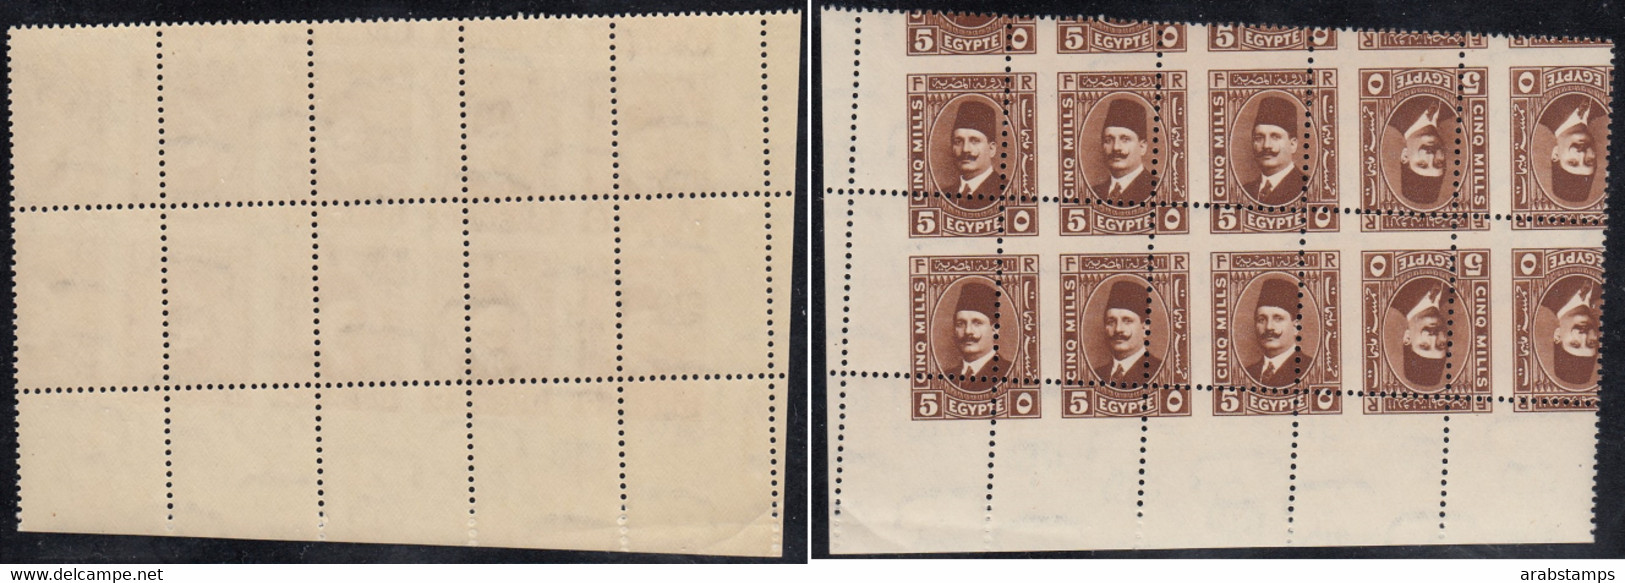 1936 Egypt King Faud  Corner Misperf  ٍRoyal Collection 5 Mills With A Watermark S.G236 Very Rare MNH - Ongebruikt